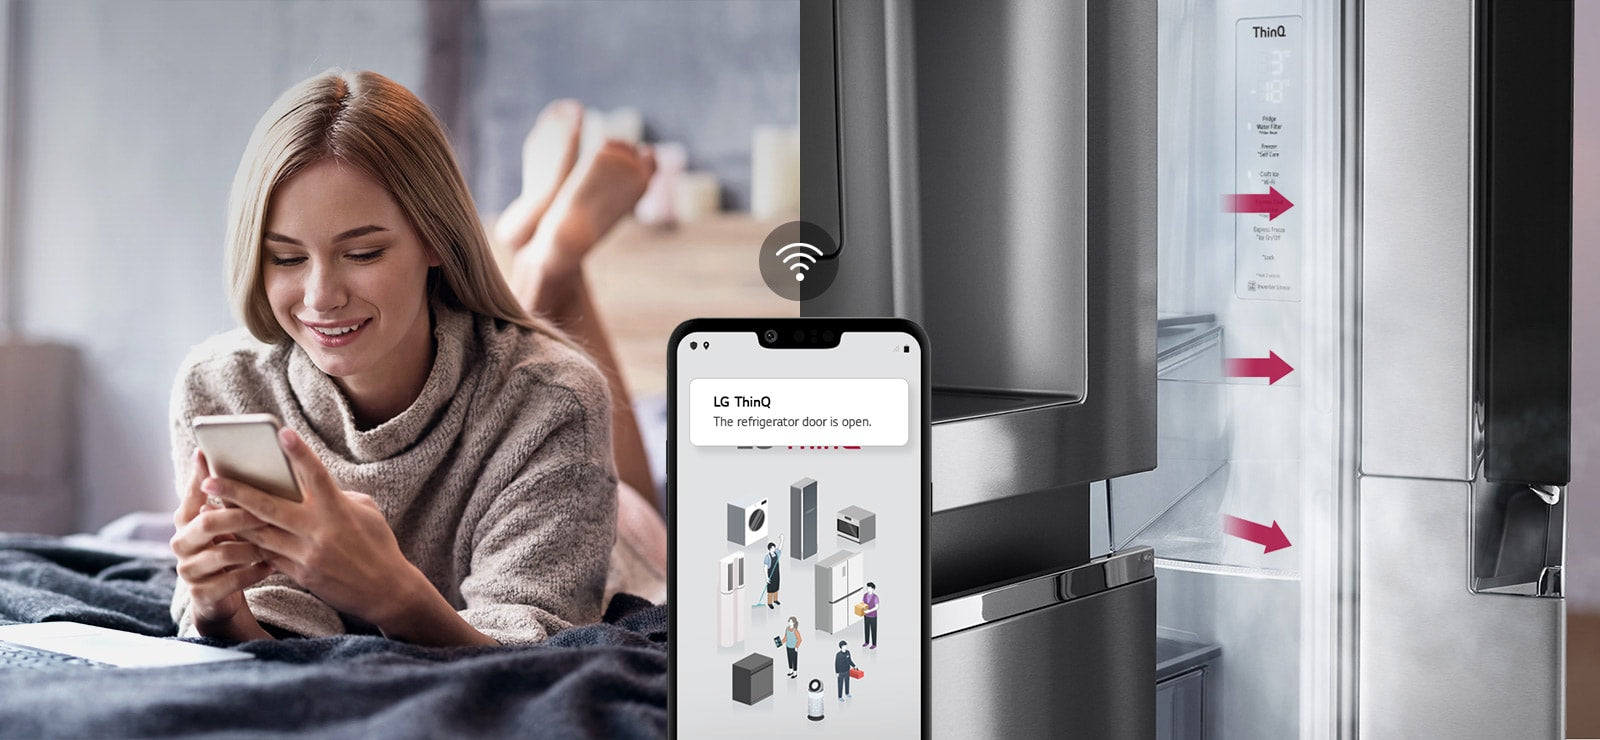 A woman rests on a bed looking at her phone screen in a picture. The second image shows that the refrigerator door has been left open. Connect and control from anywhere